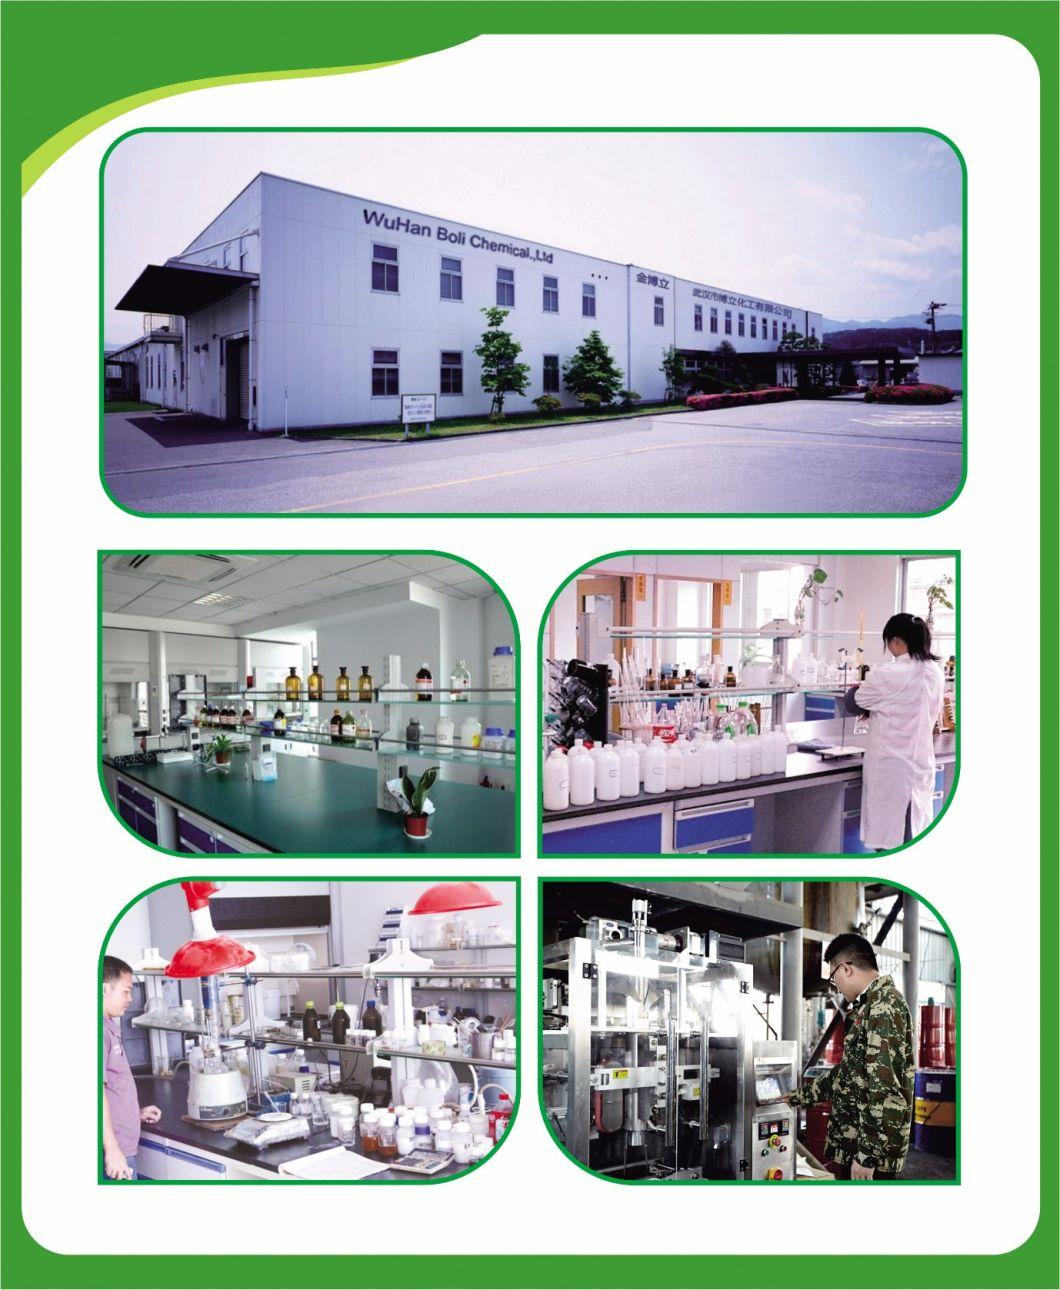 China Supplier GBL Sponge Specialize Glue Spray Adhesive